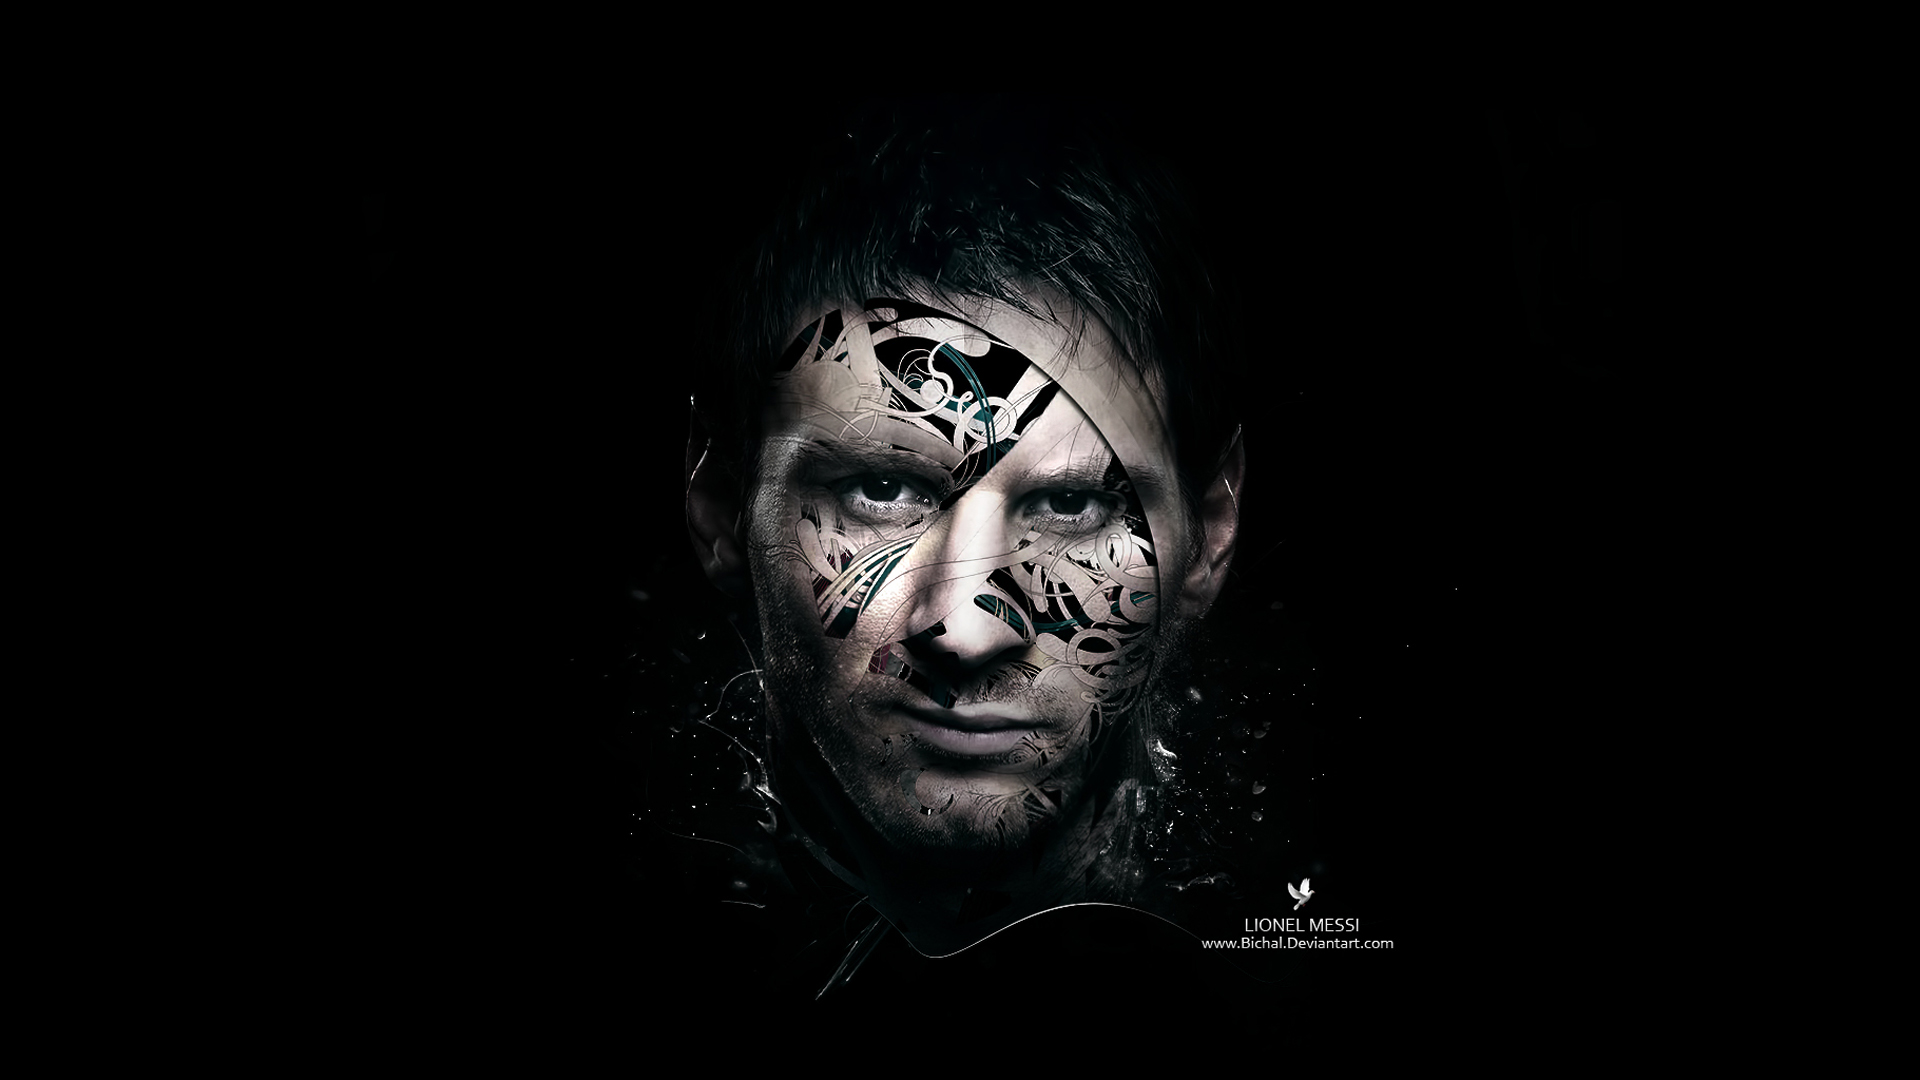 Lionel Messi Background   Wallpaper High Definition High Quality